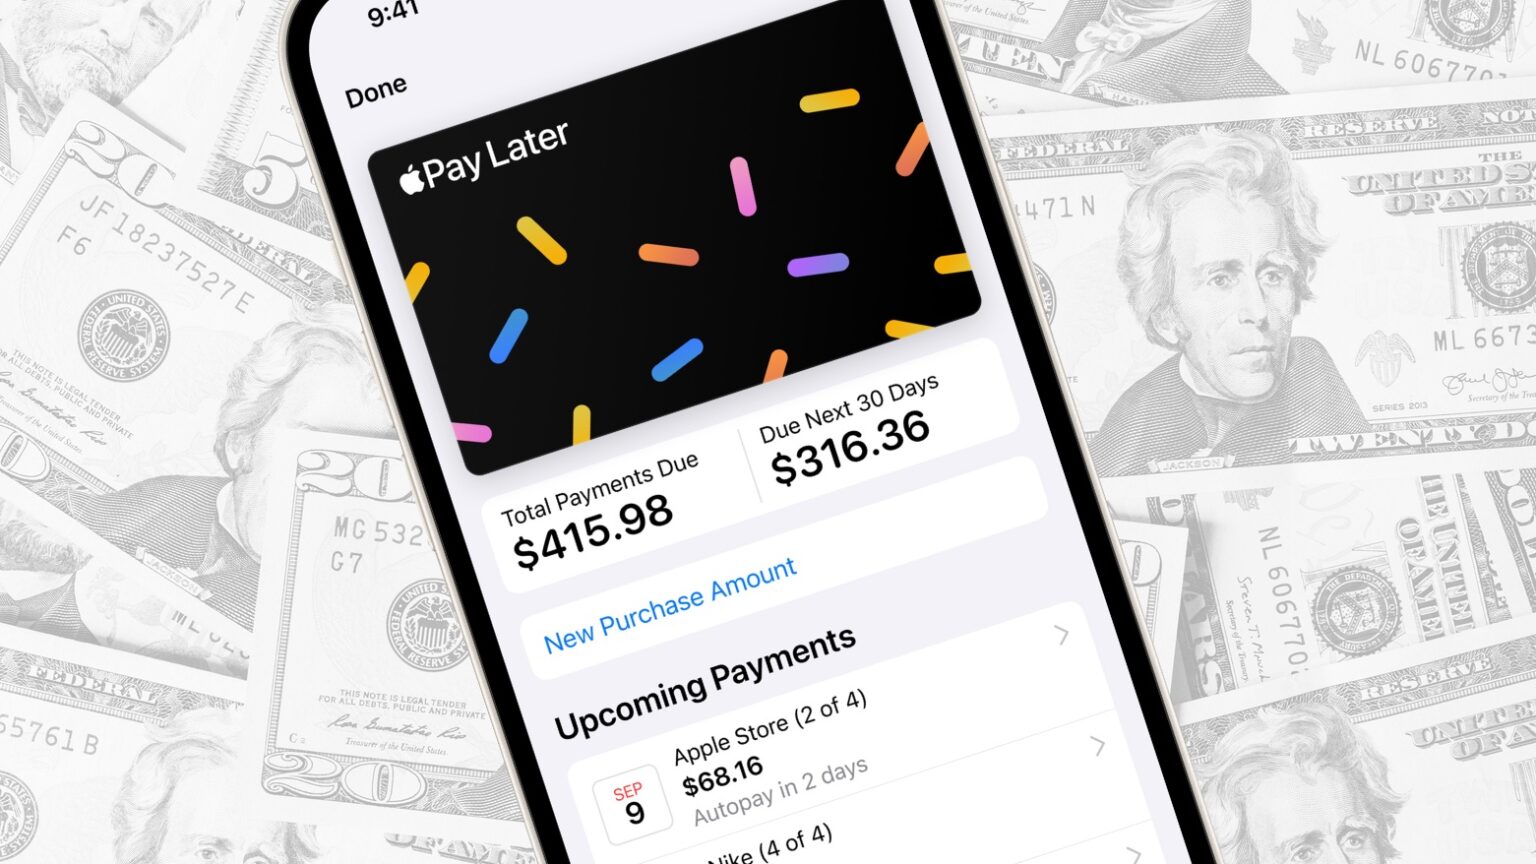 Apple Pay Later lets shoppers buy now then pay in installments